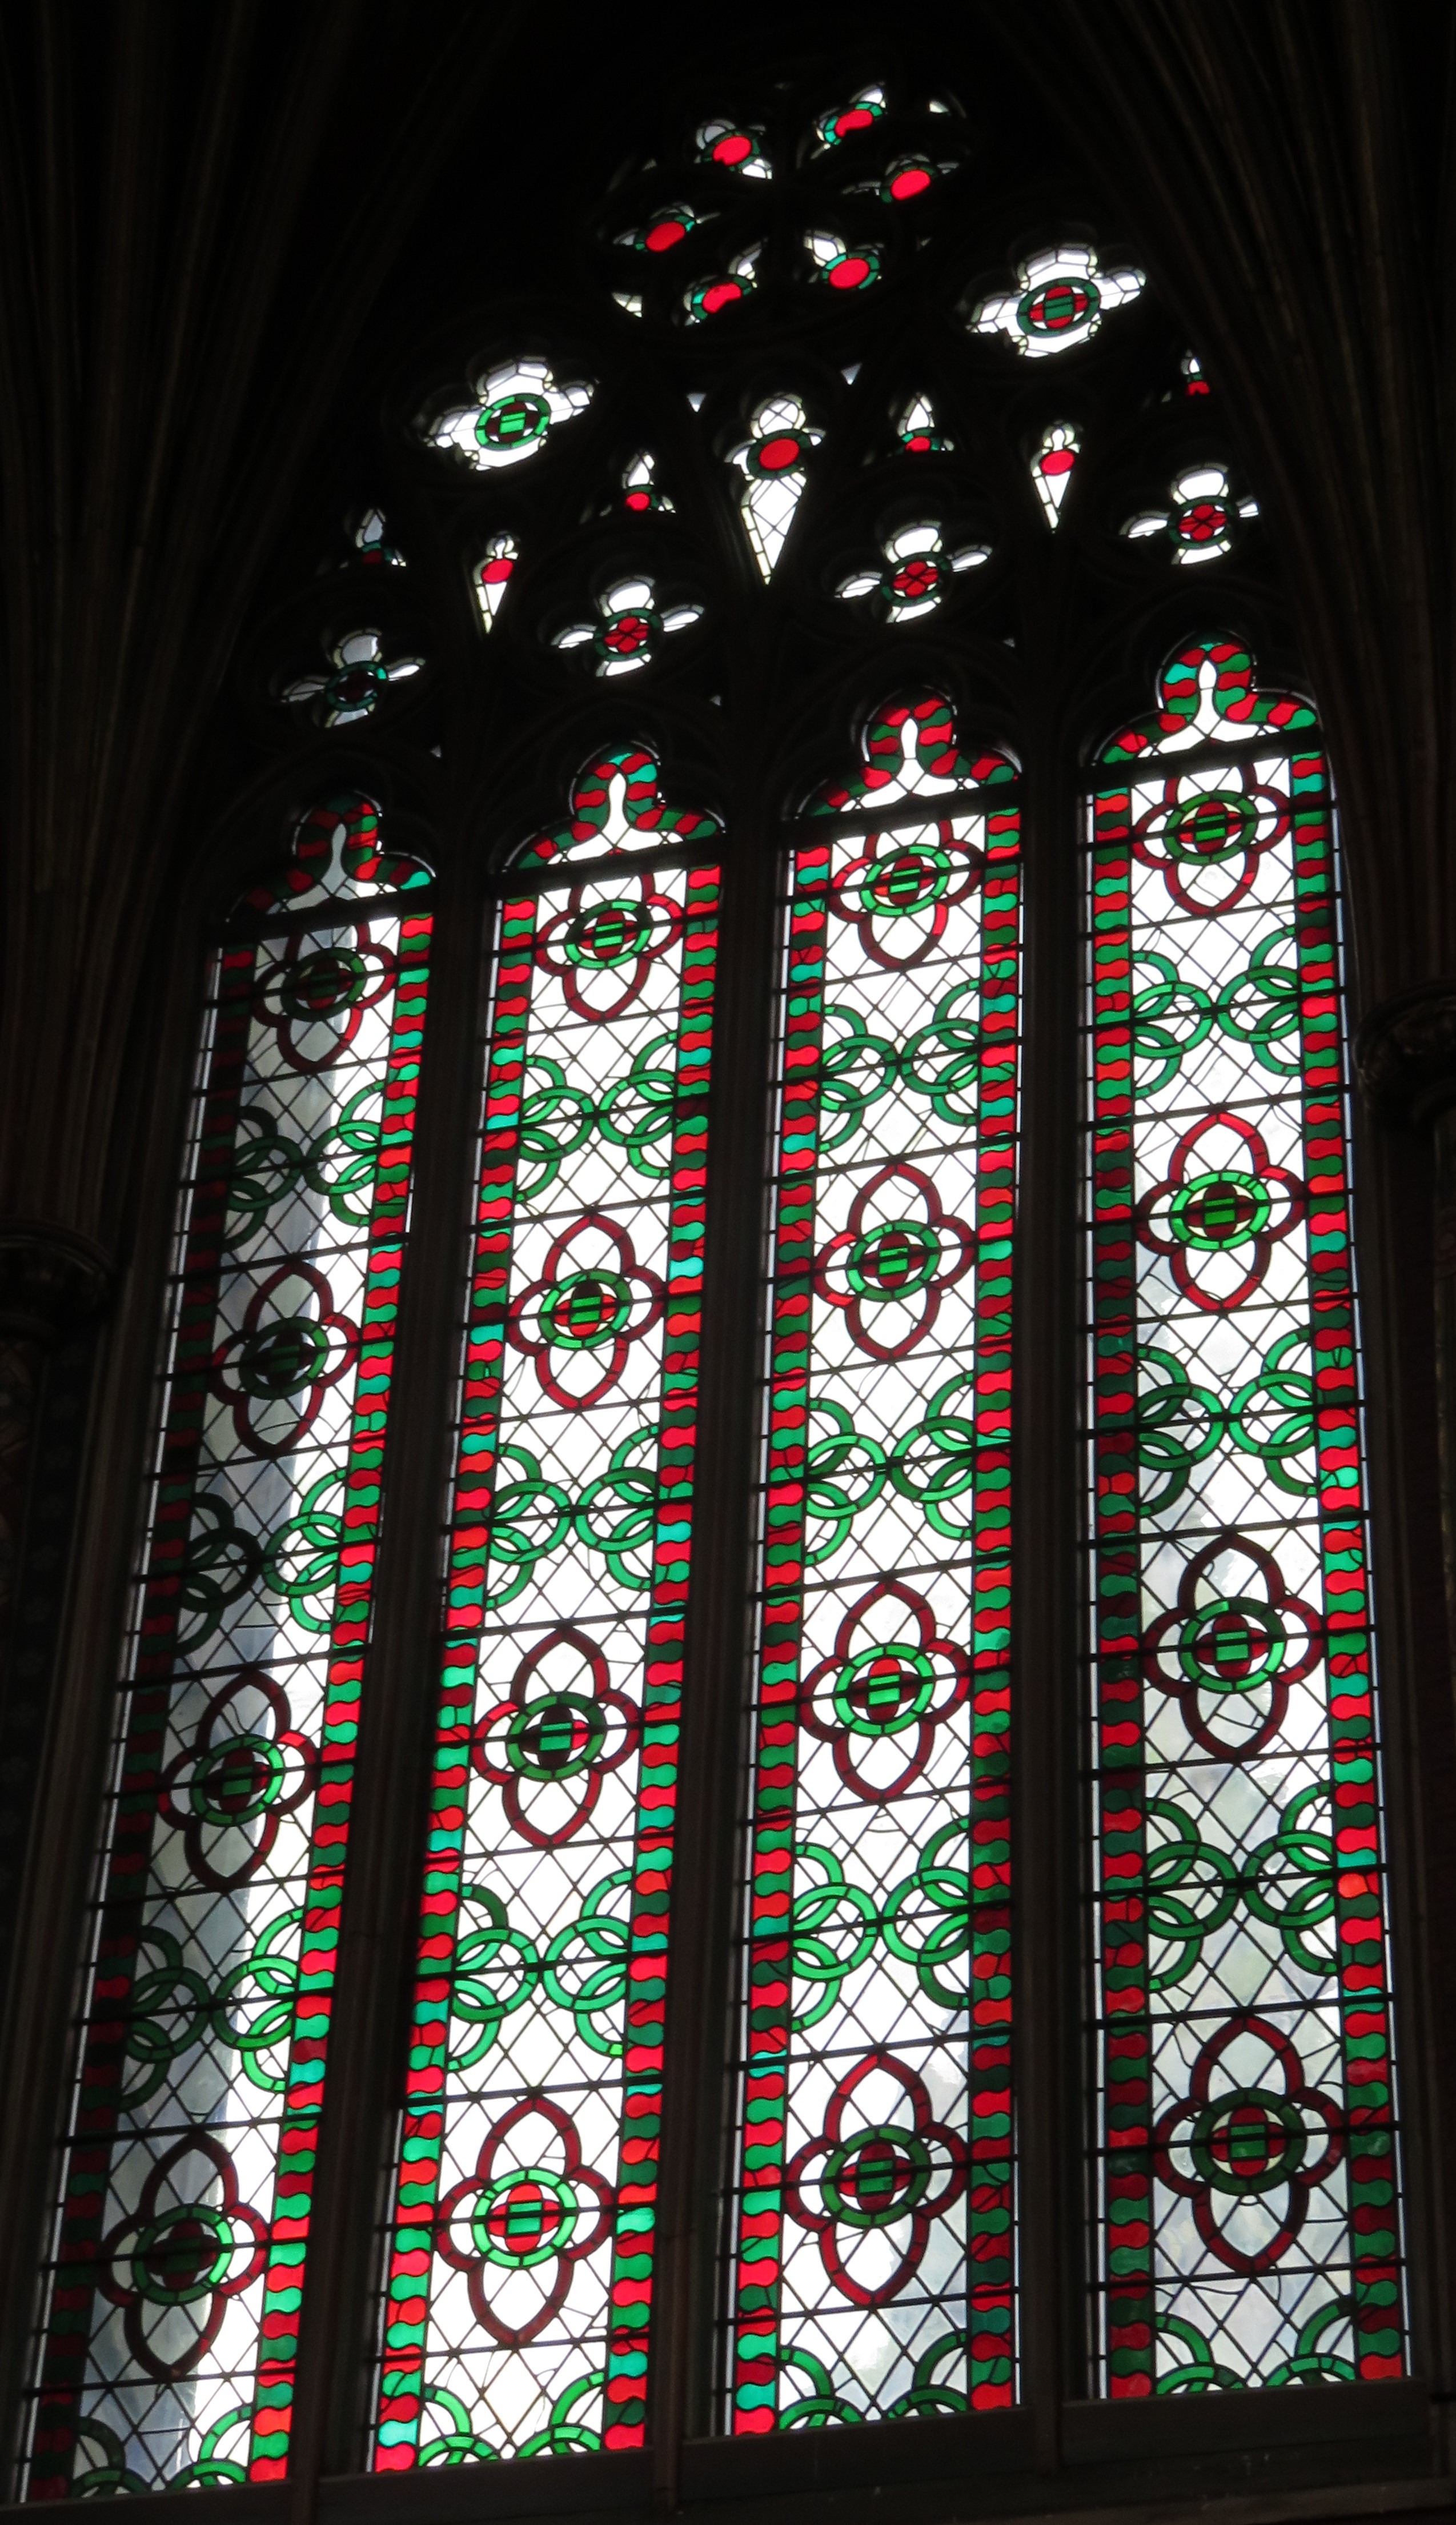 Red Stained Glass Window in Octagon Tower